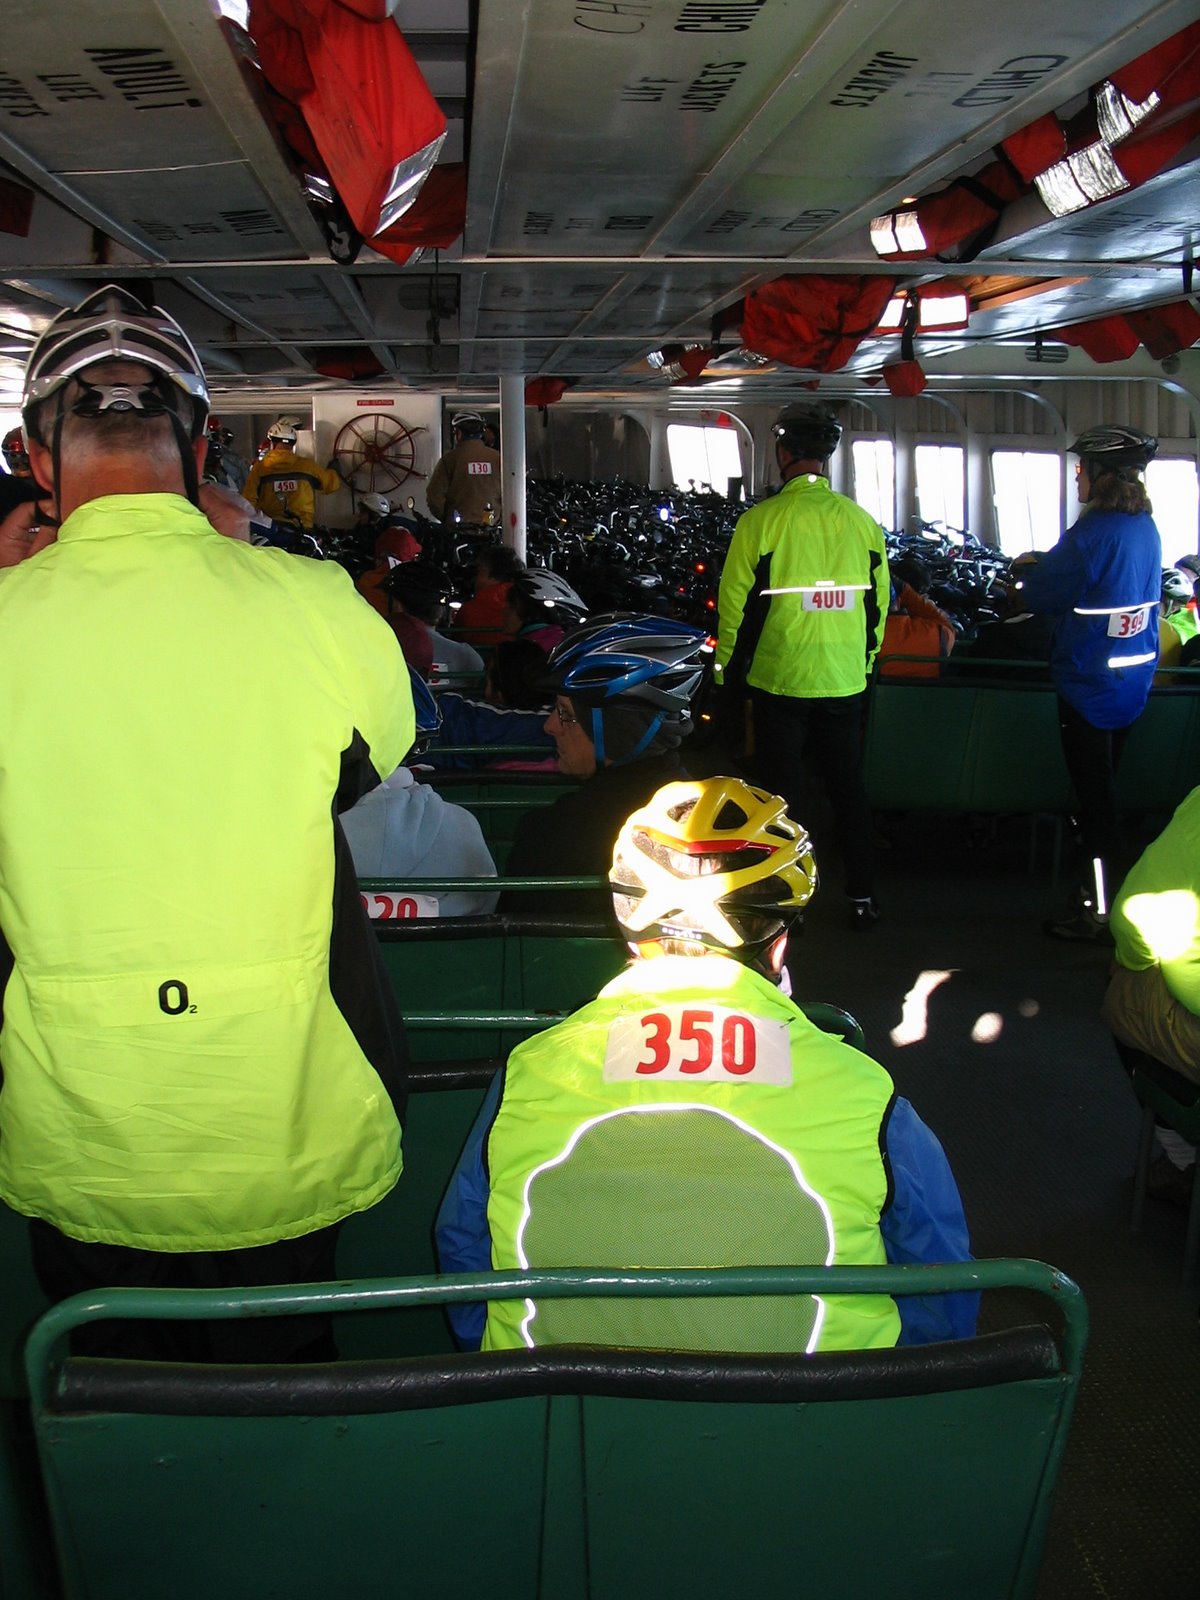 [Ferry+full+of+bicycles.jpg]